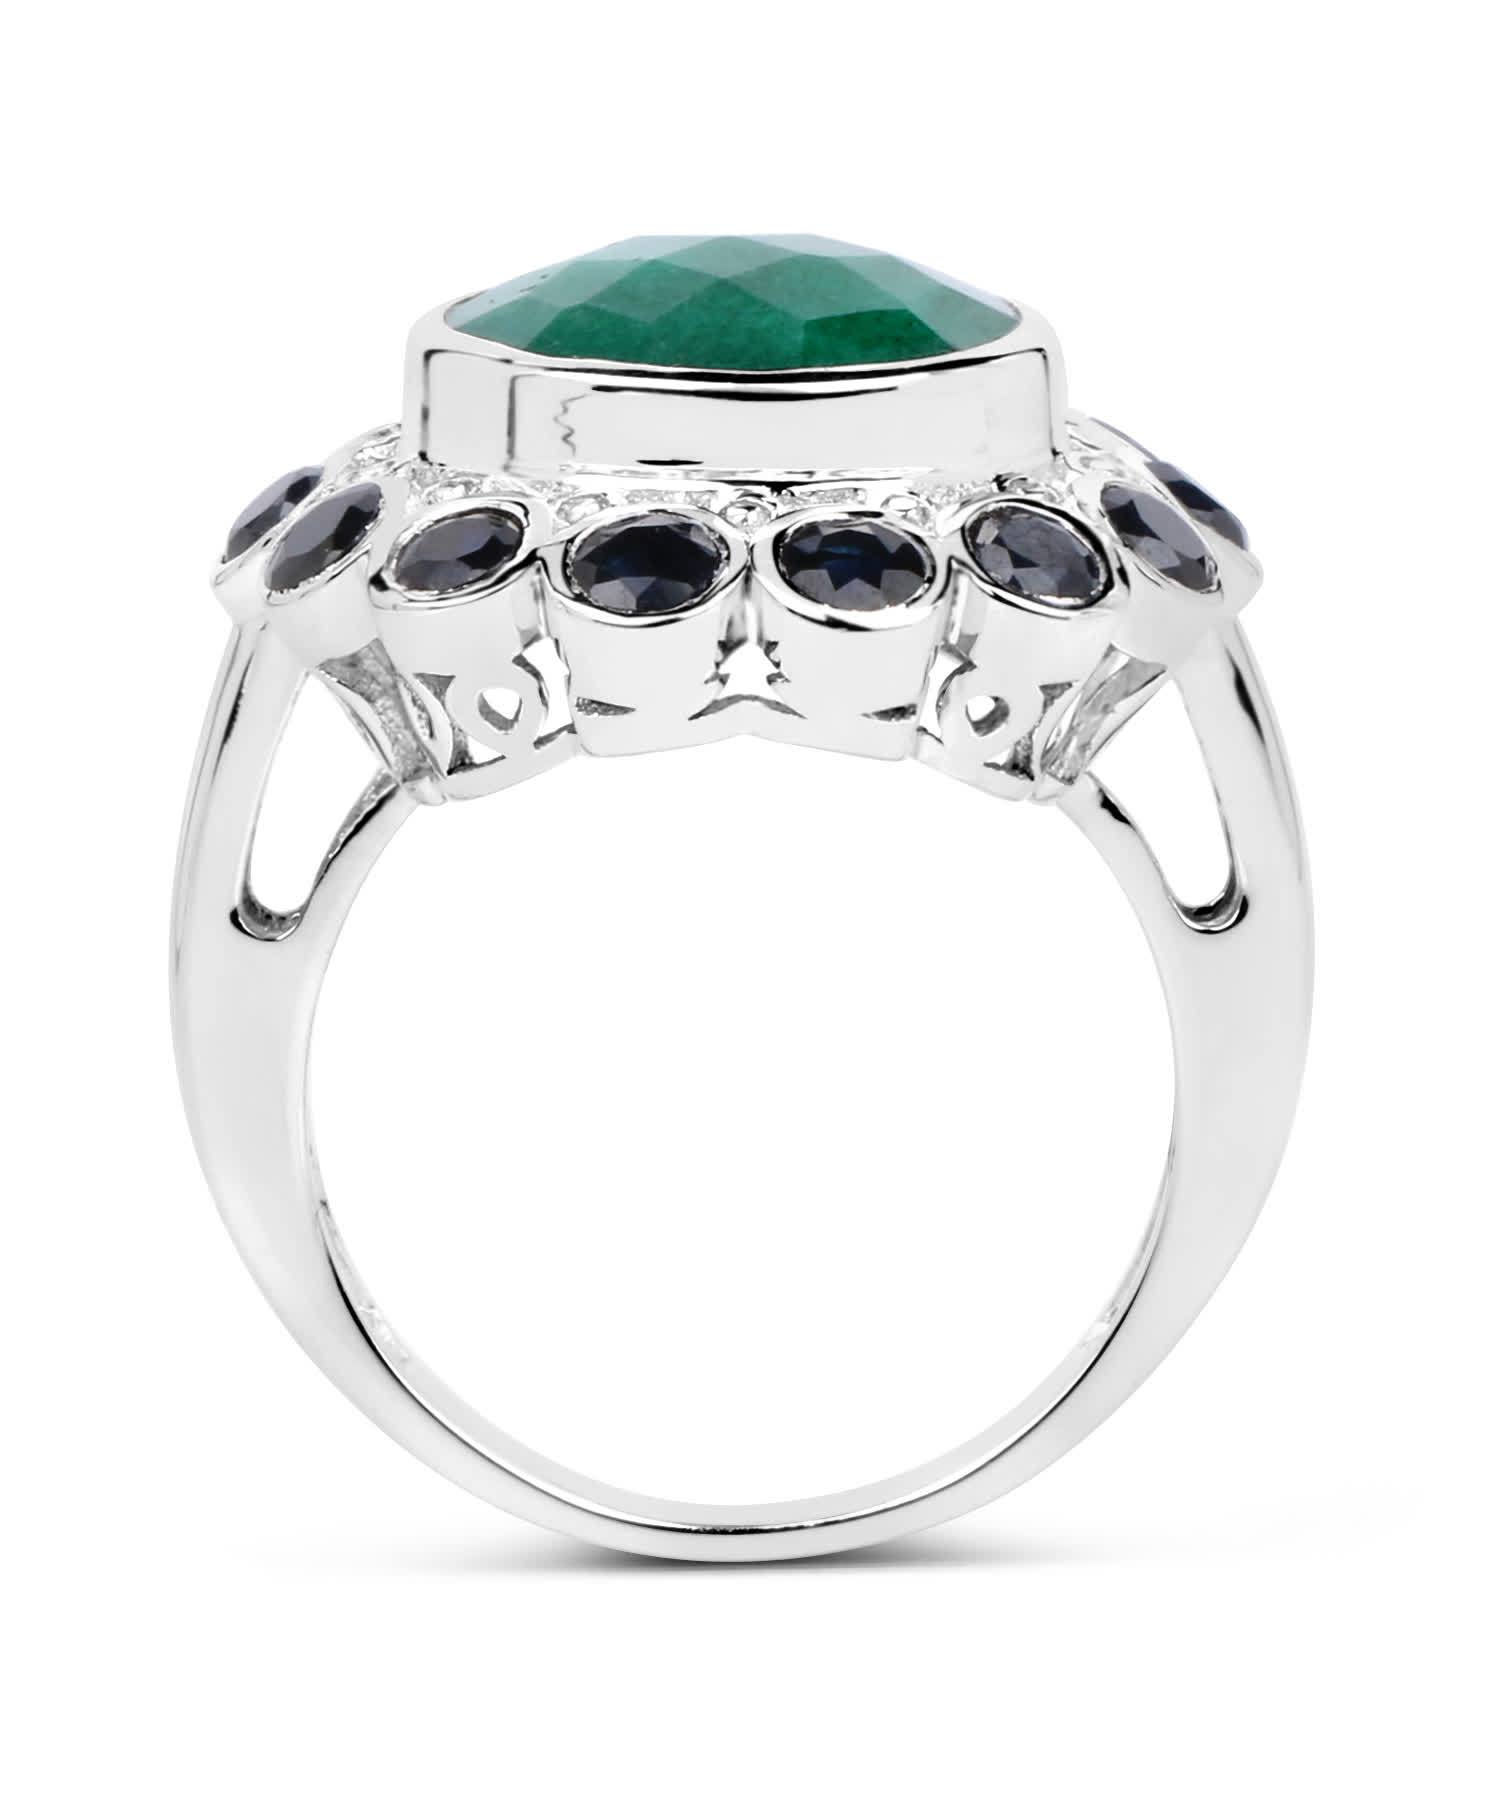 6.88ctw Natural Forest Green Emerald and Midnight Blue Sapphire Rhodium Plated 925 Sterling Silver Cocktail Ring View 2